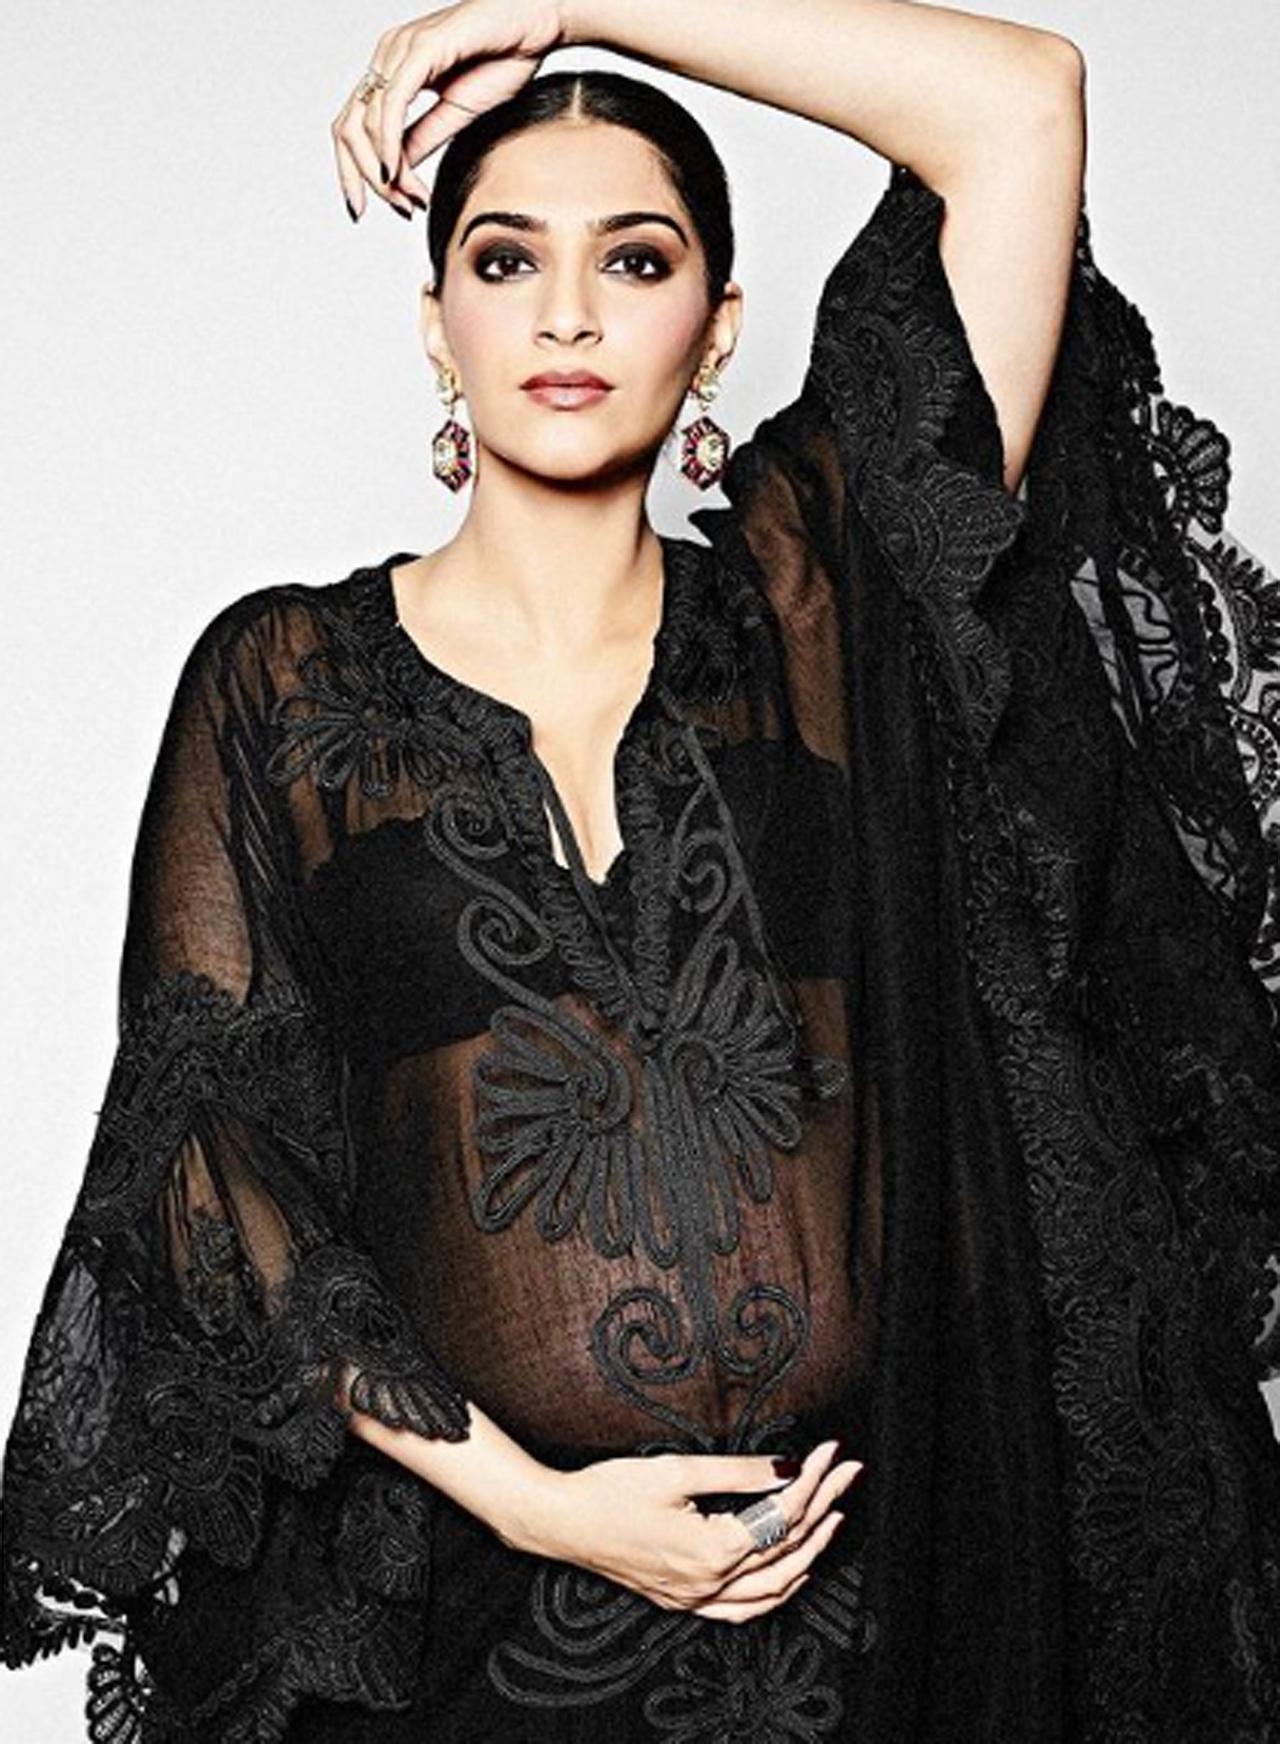 Showing off her beautiful maternity look, Sonam looked glamorous as ever as she held her baby bump with one hand while gently placing the other on her head.